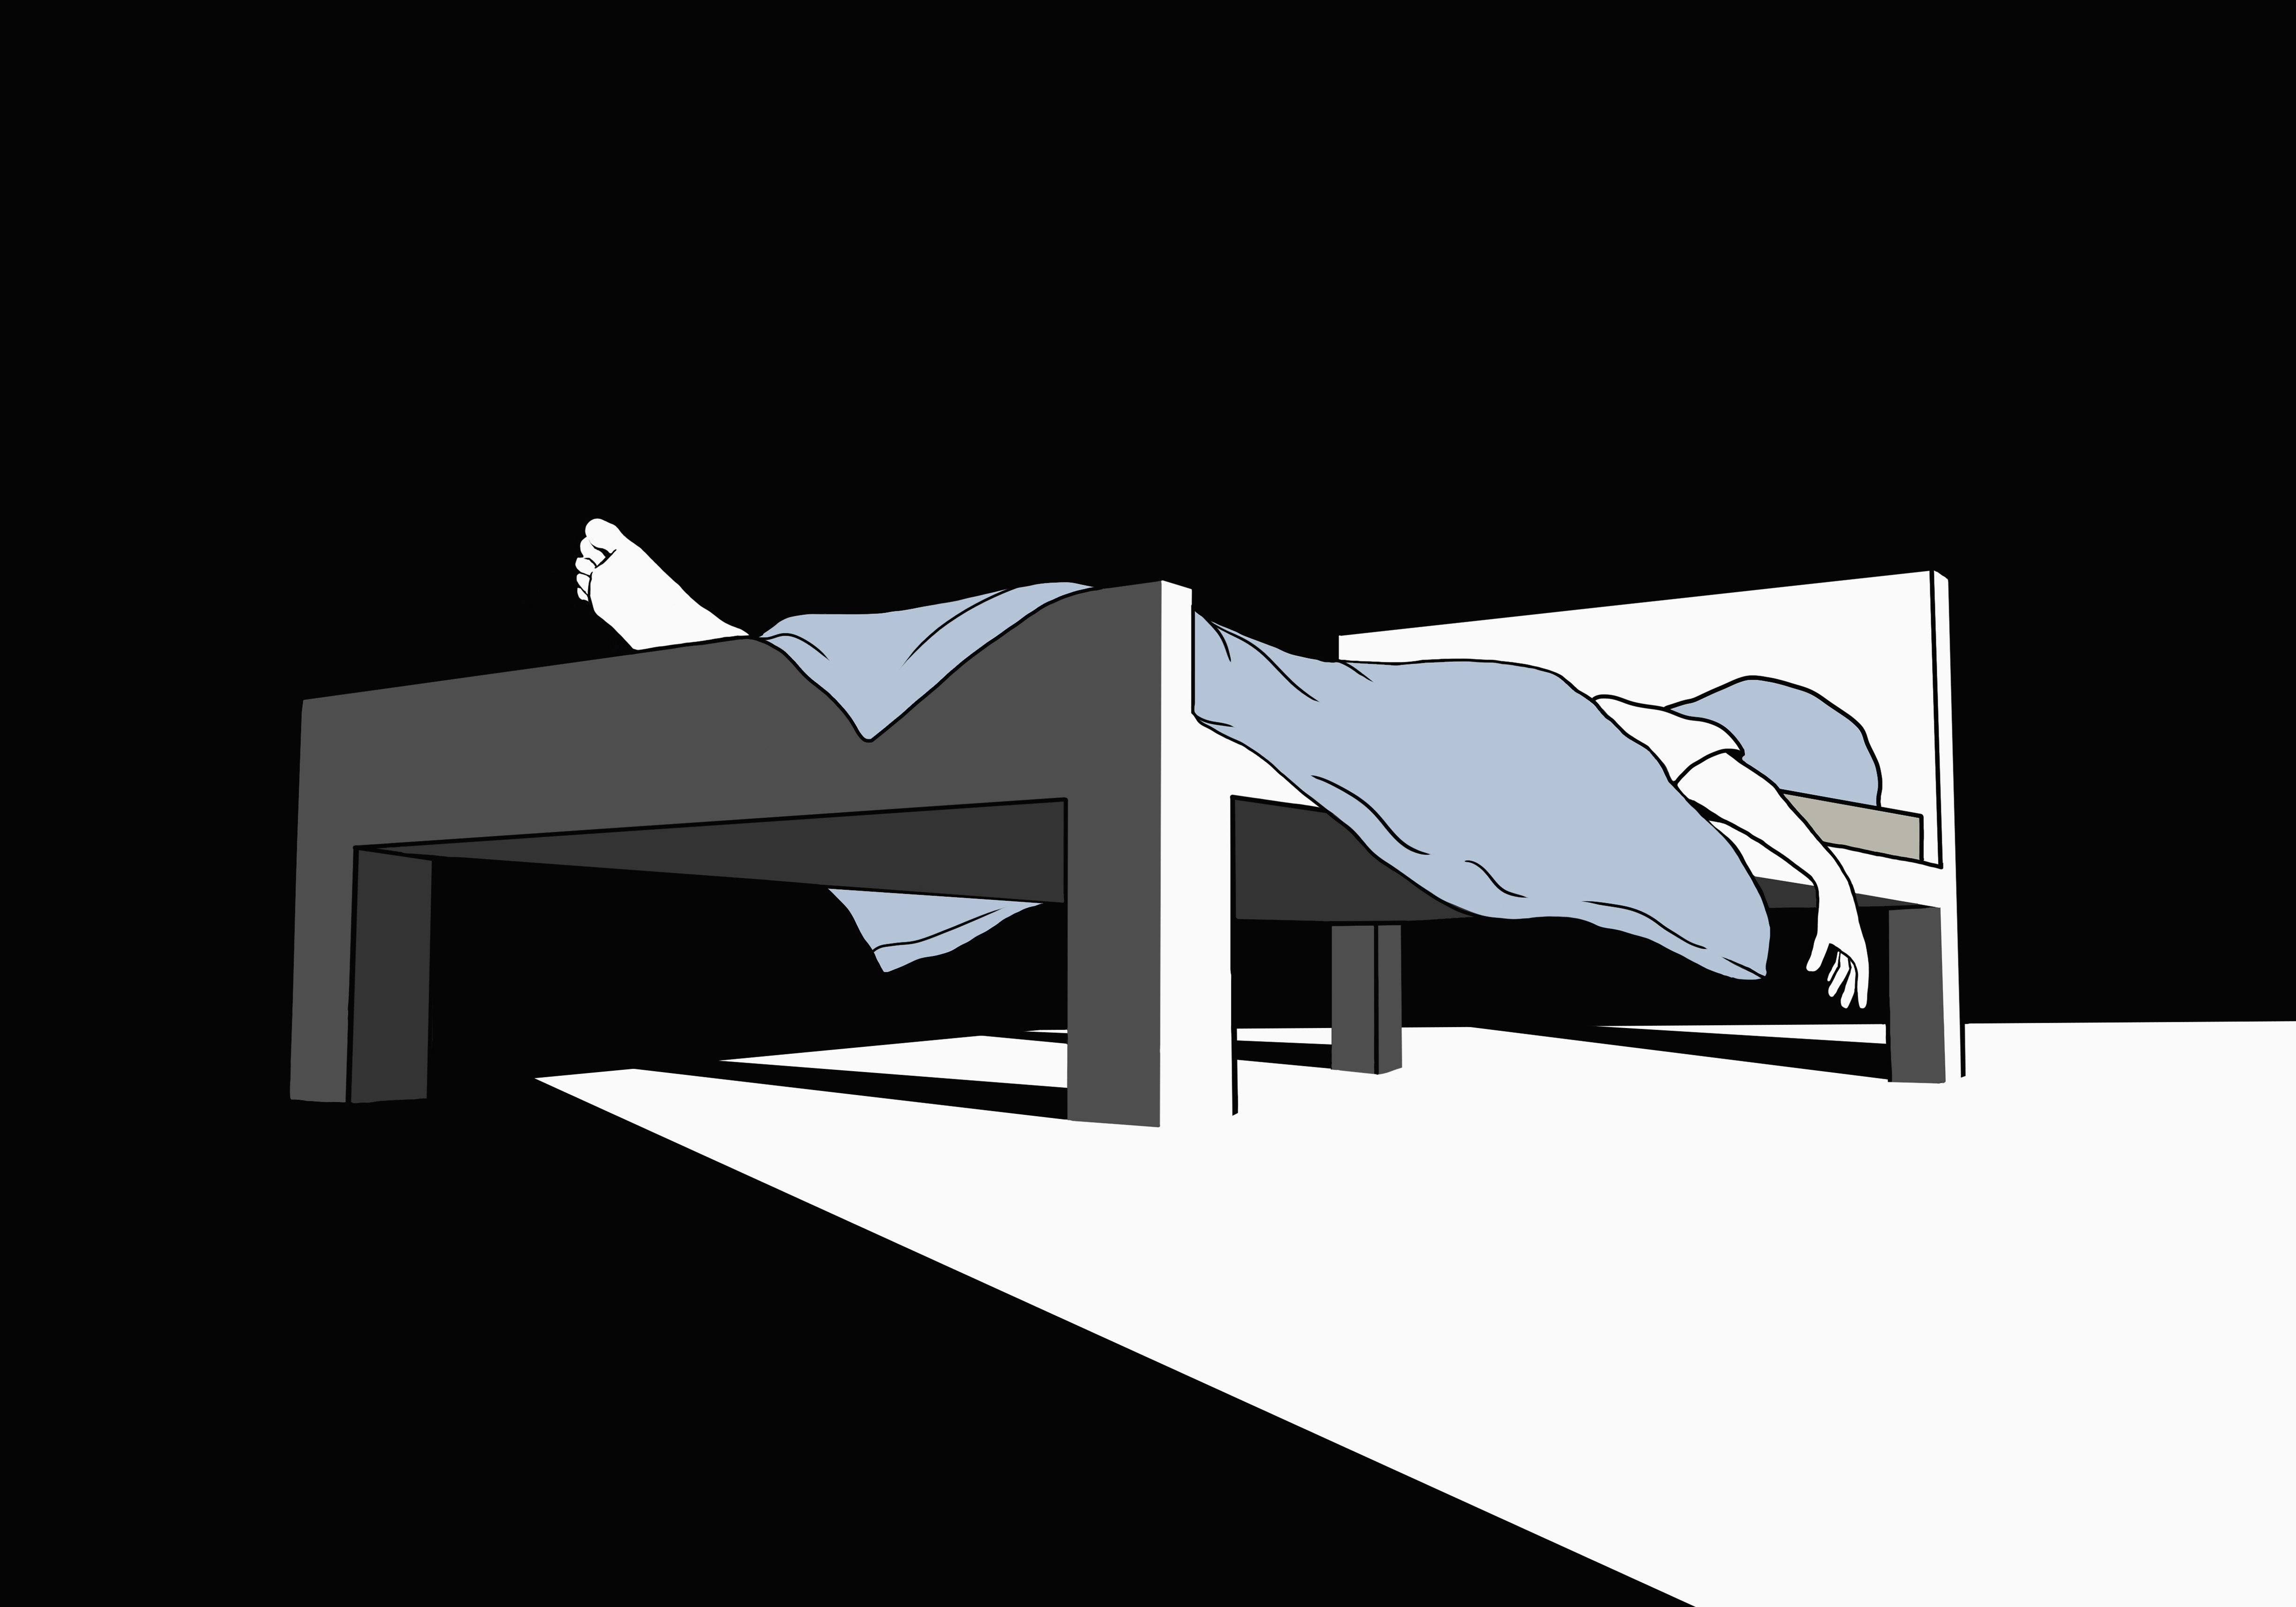 An illustration of an exhausted person sleeping in bed.